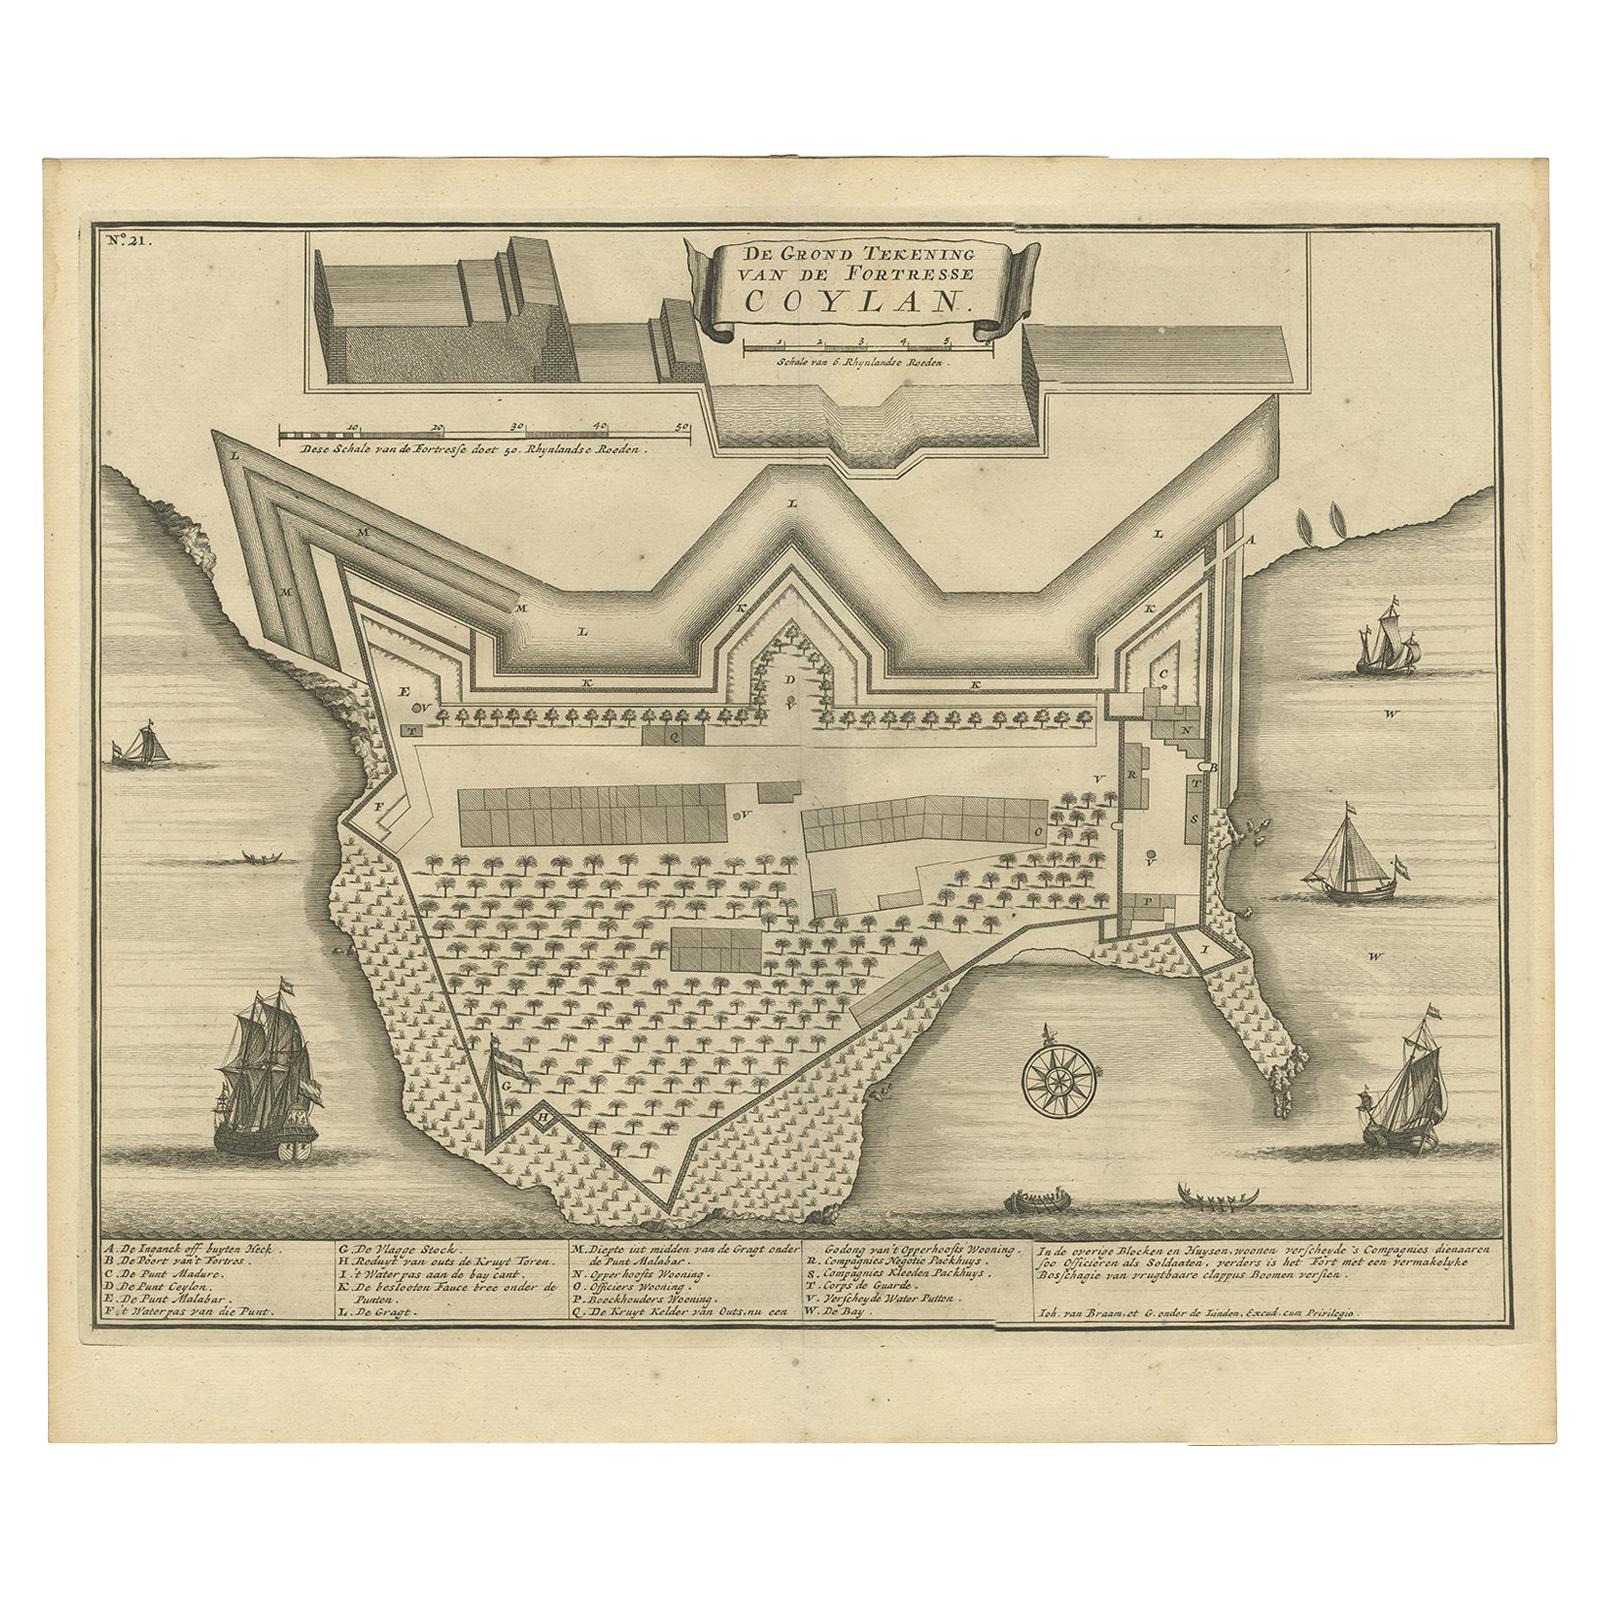 Antique Print of the Fort at Kollam ‘India’ by Valentijn, 1726